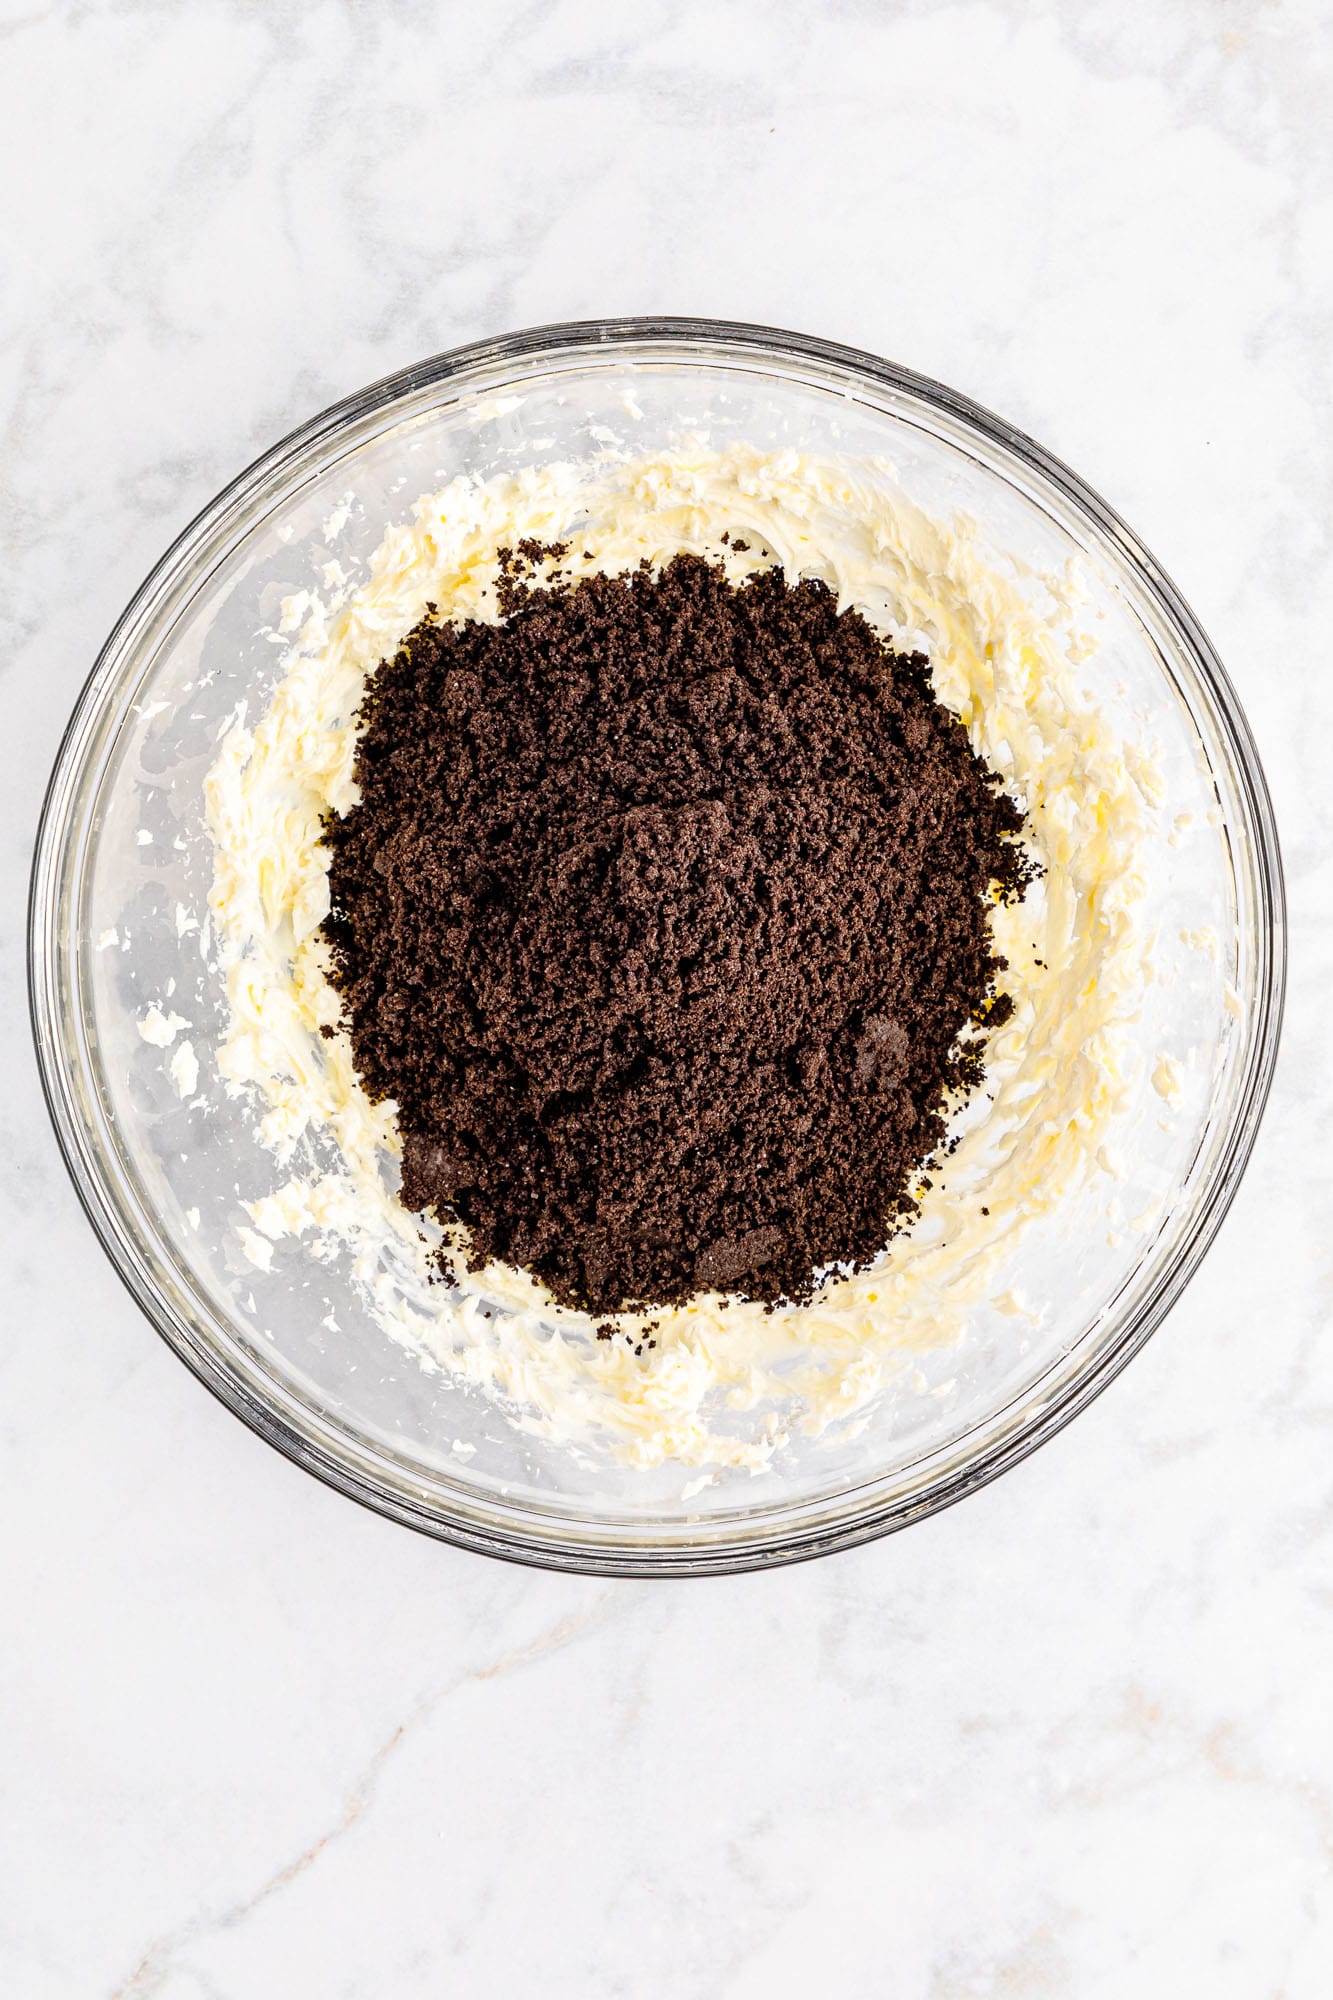 Mixing oreo crumbs with cream cheese